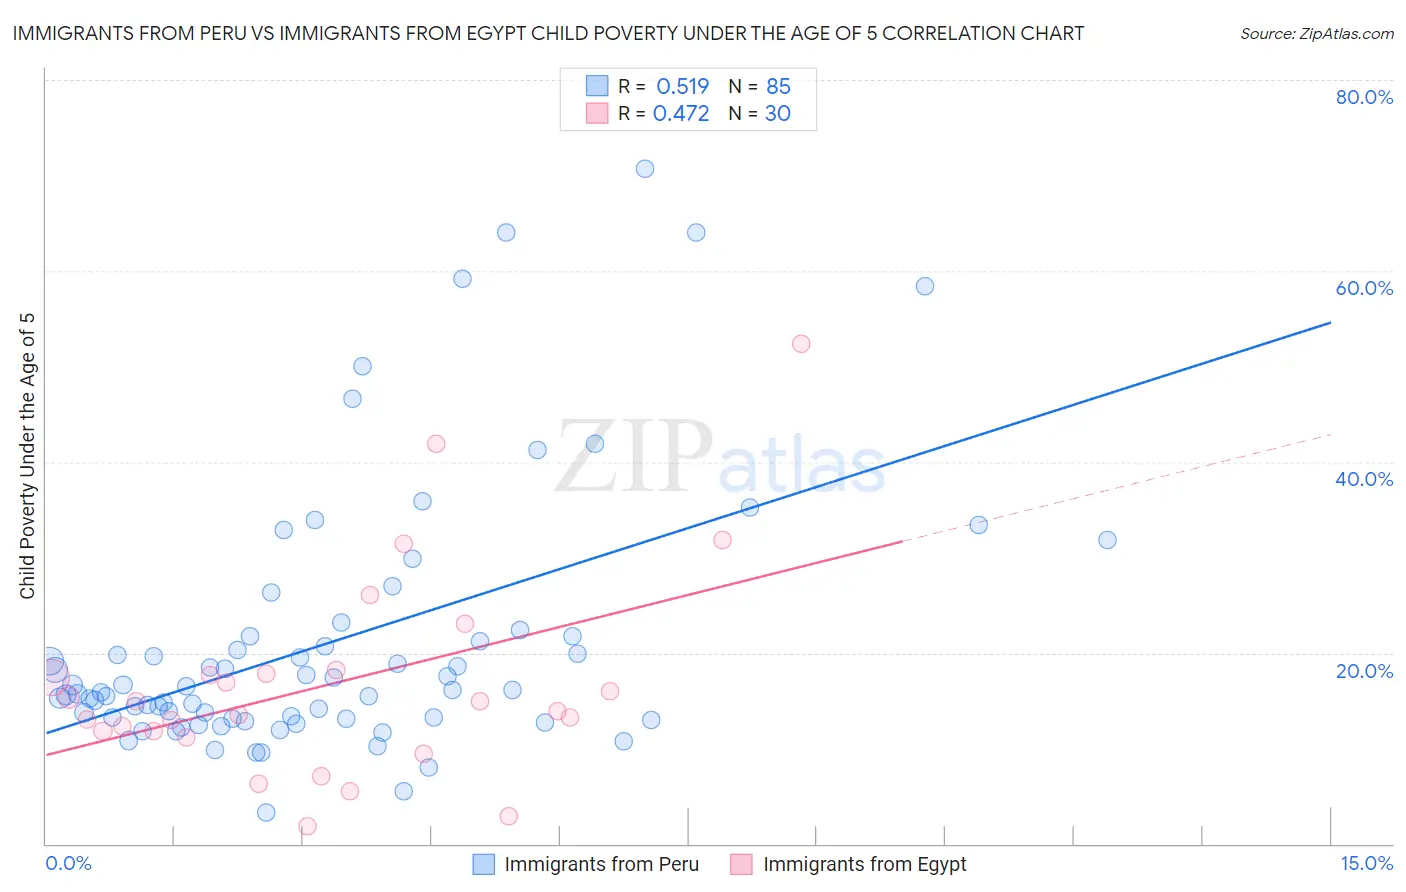 Immigrants from Peru vs Immigrants from Egypt Child Poverty Under the Age of 5